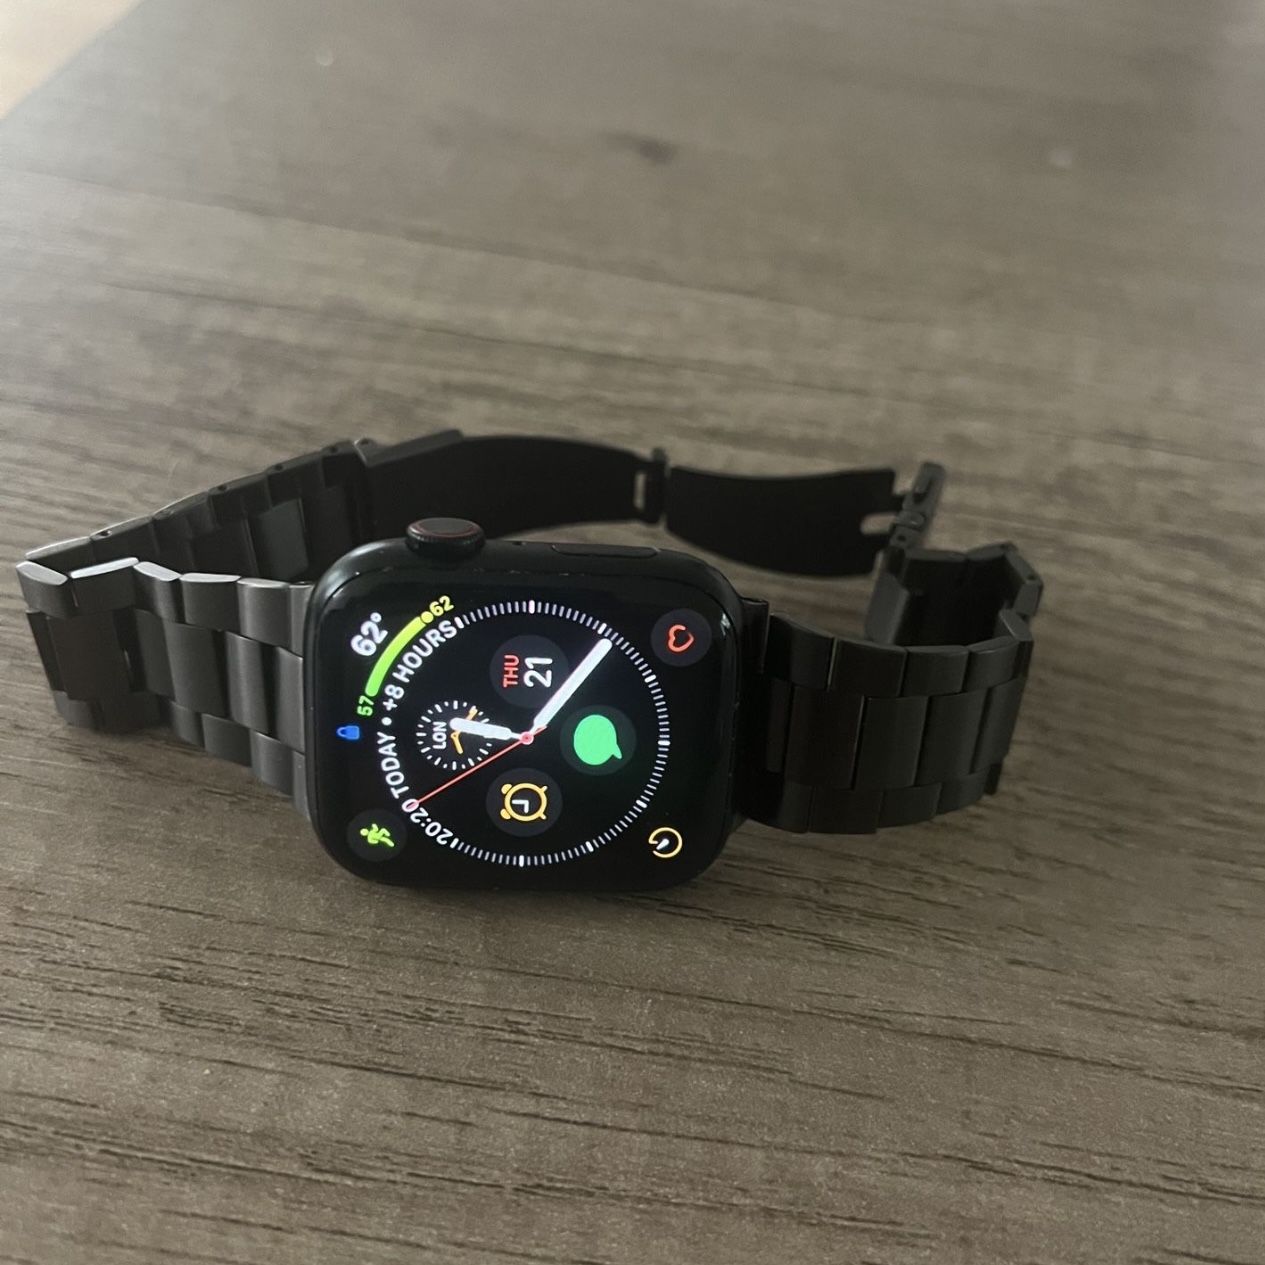 Apple Watch Series 7 With Cellular Connectivity 